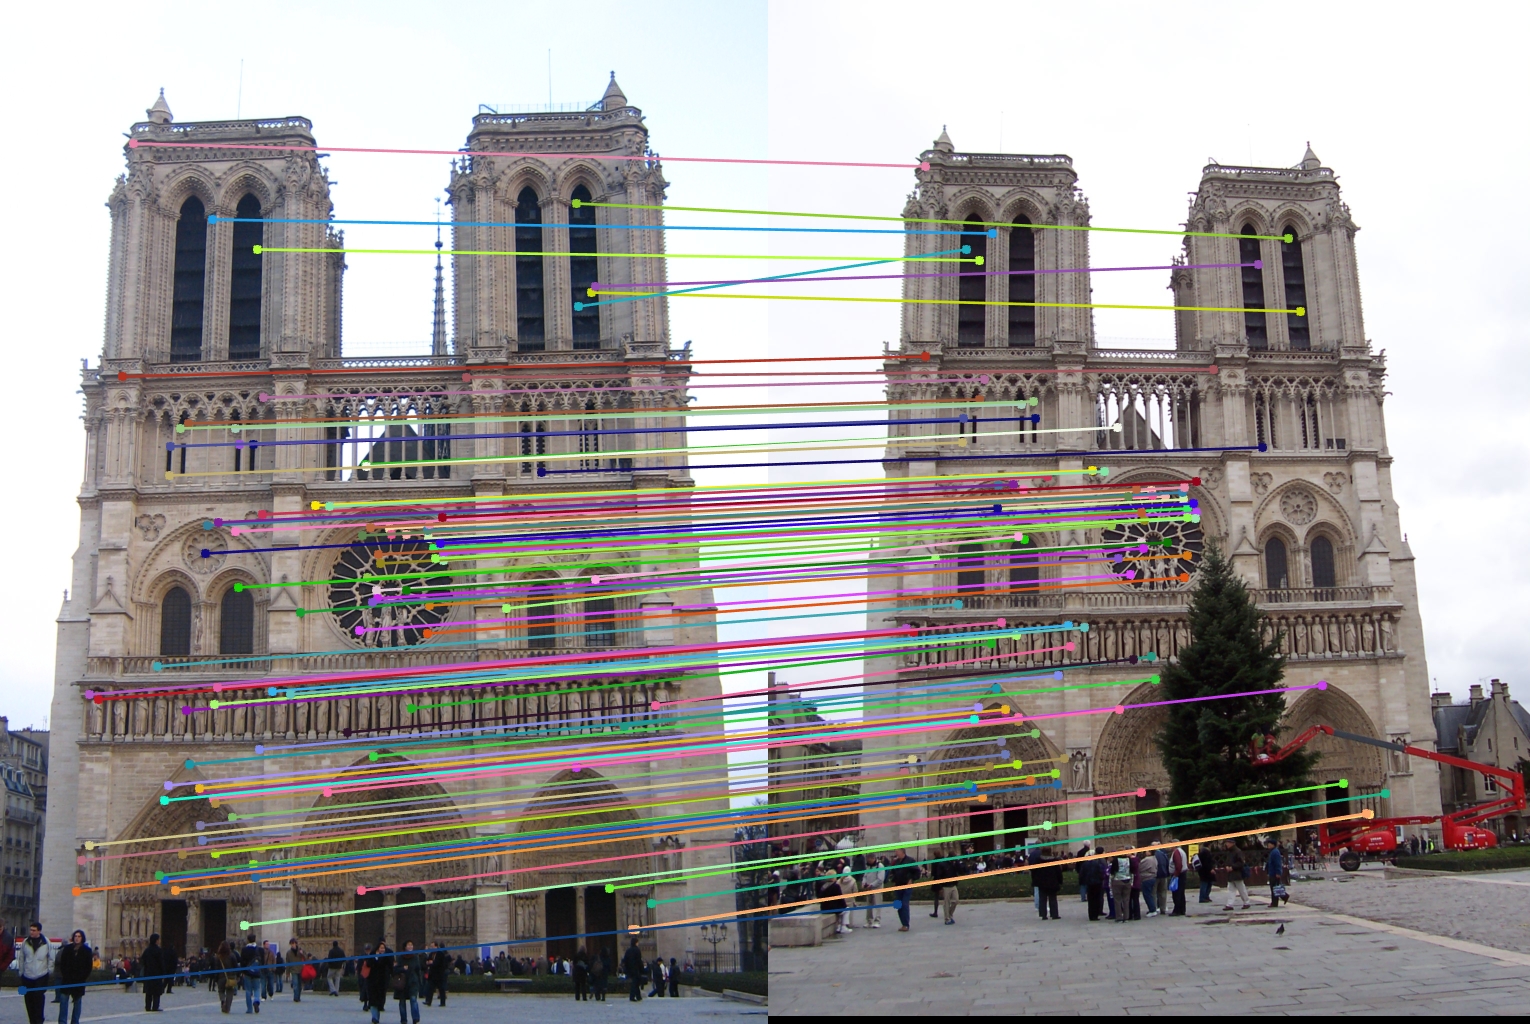 Interest Points on two images of Notre Dame